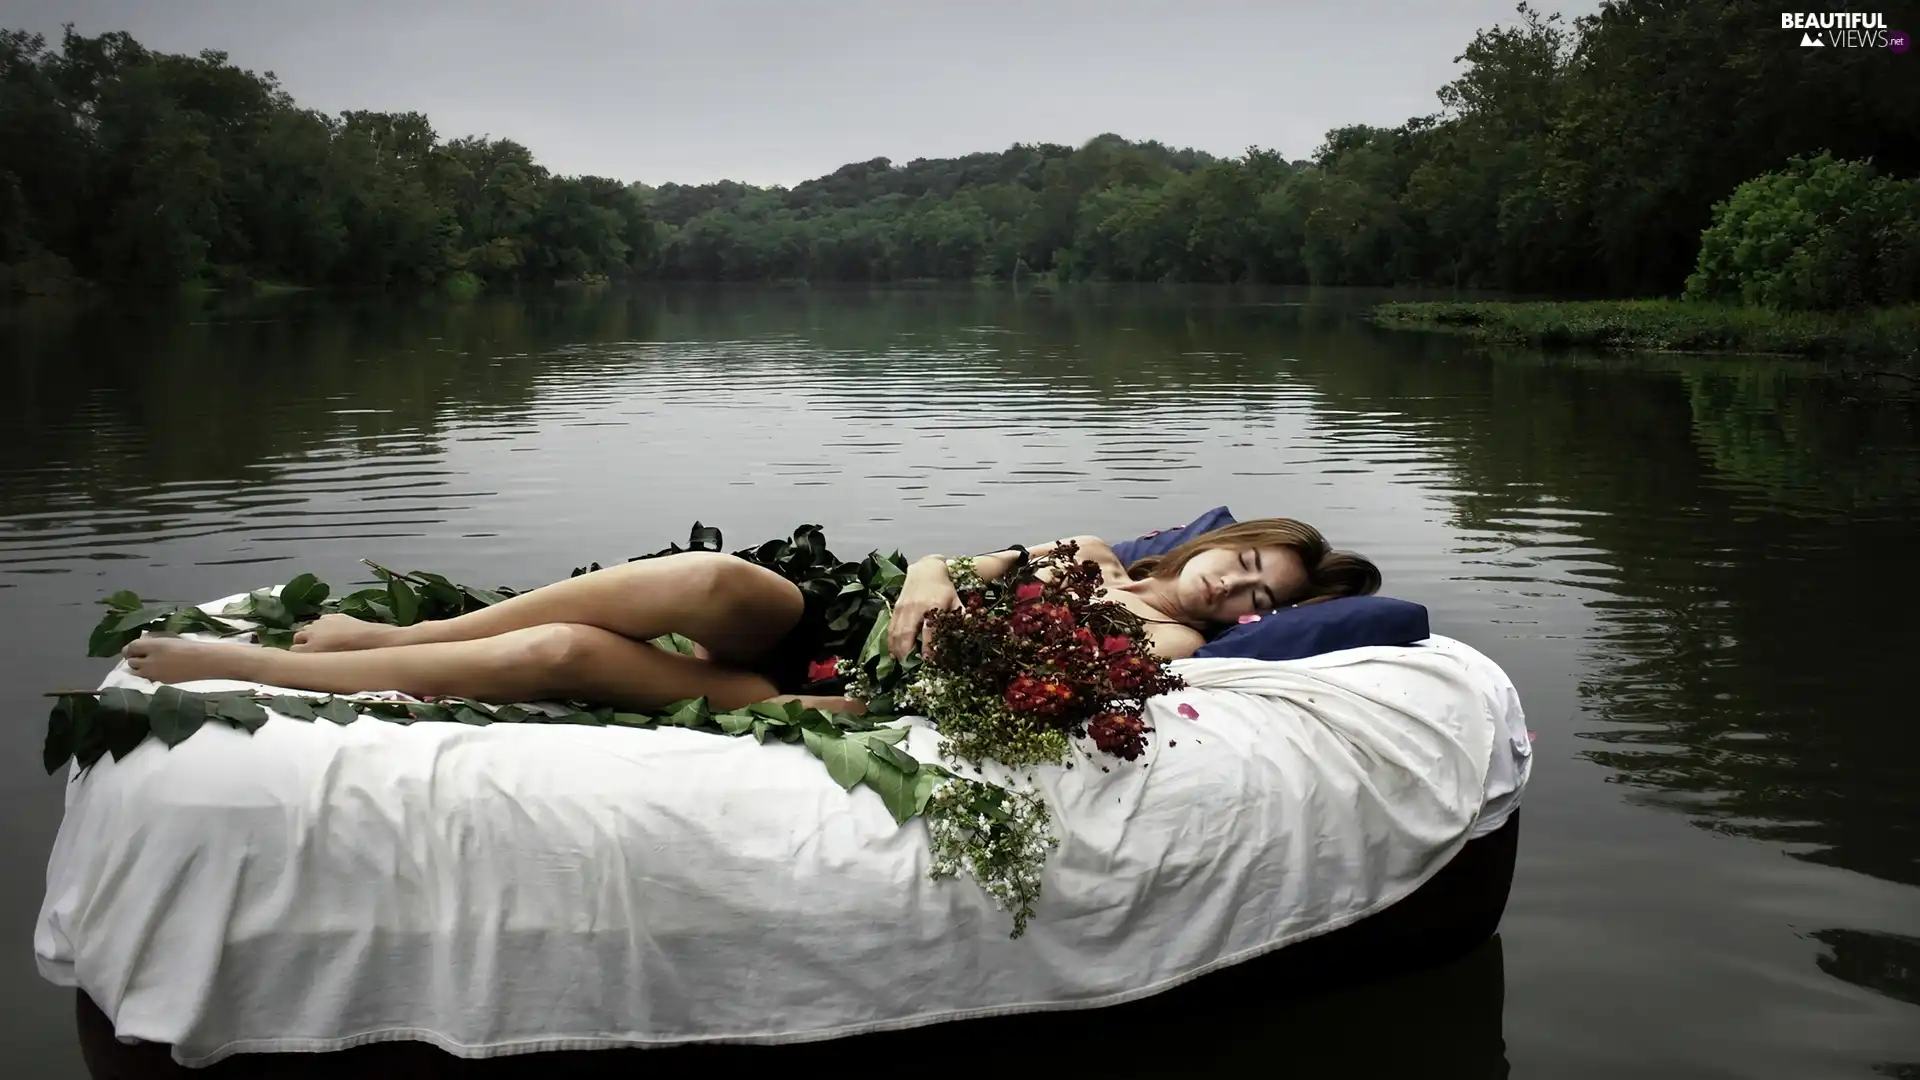 River, Women, Flowers, dream, White Bed, forest